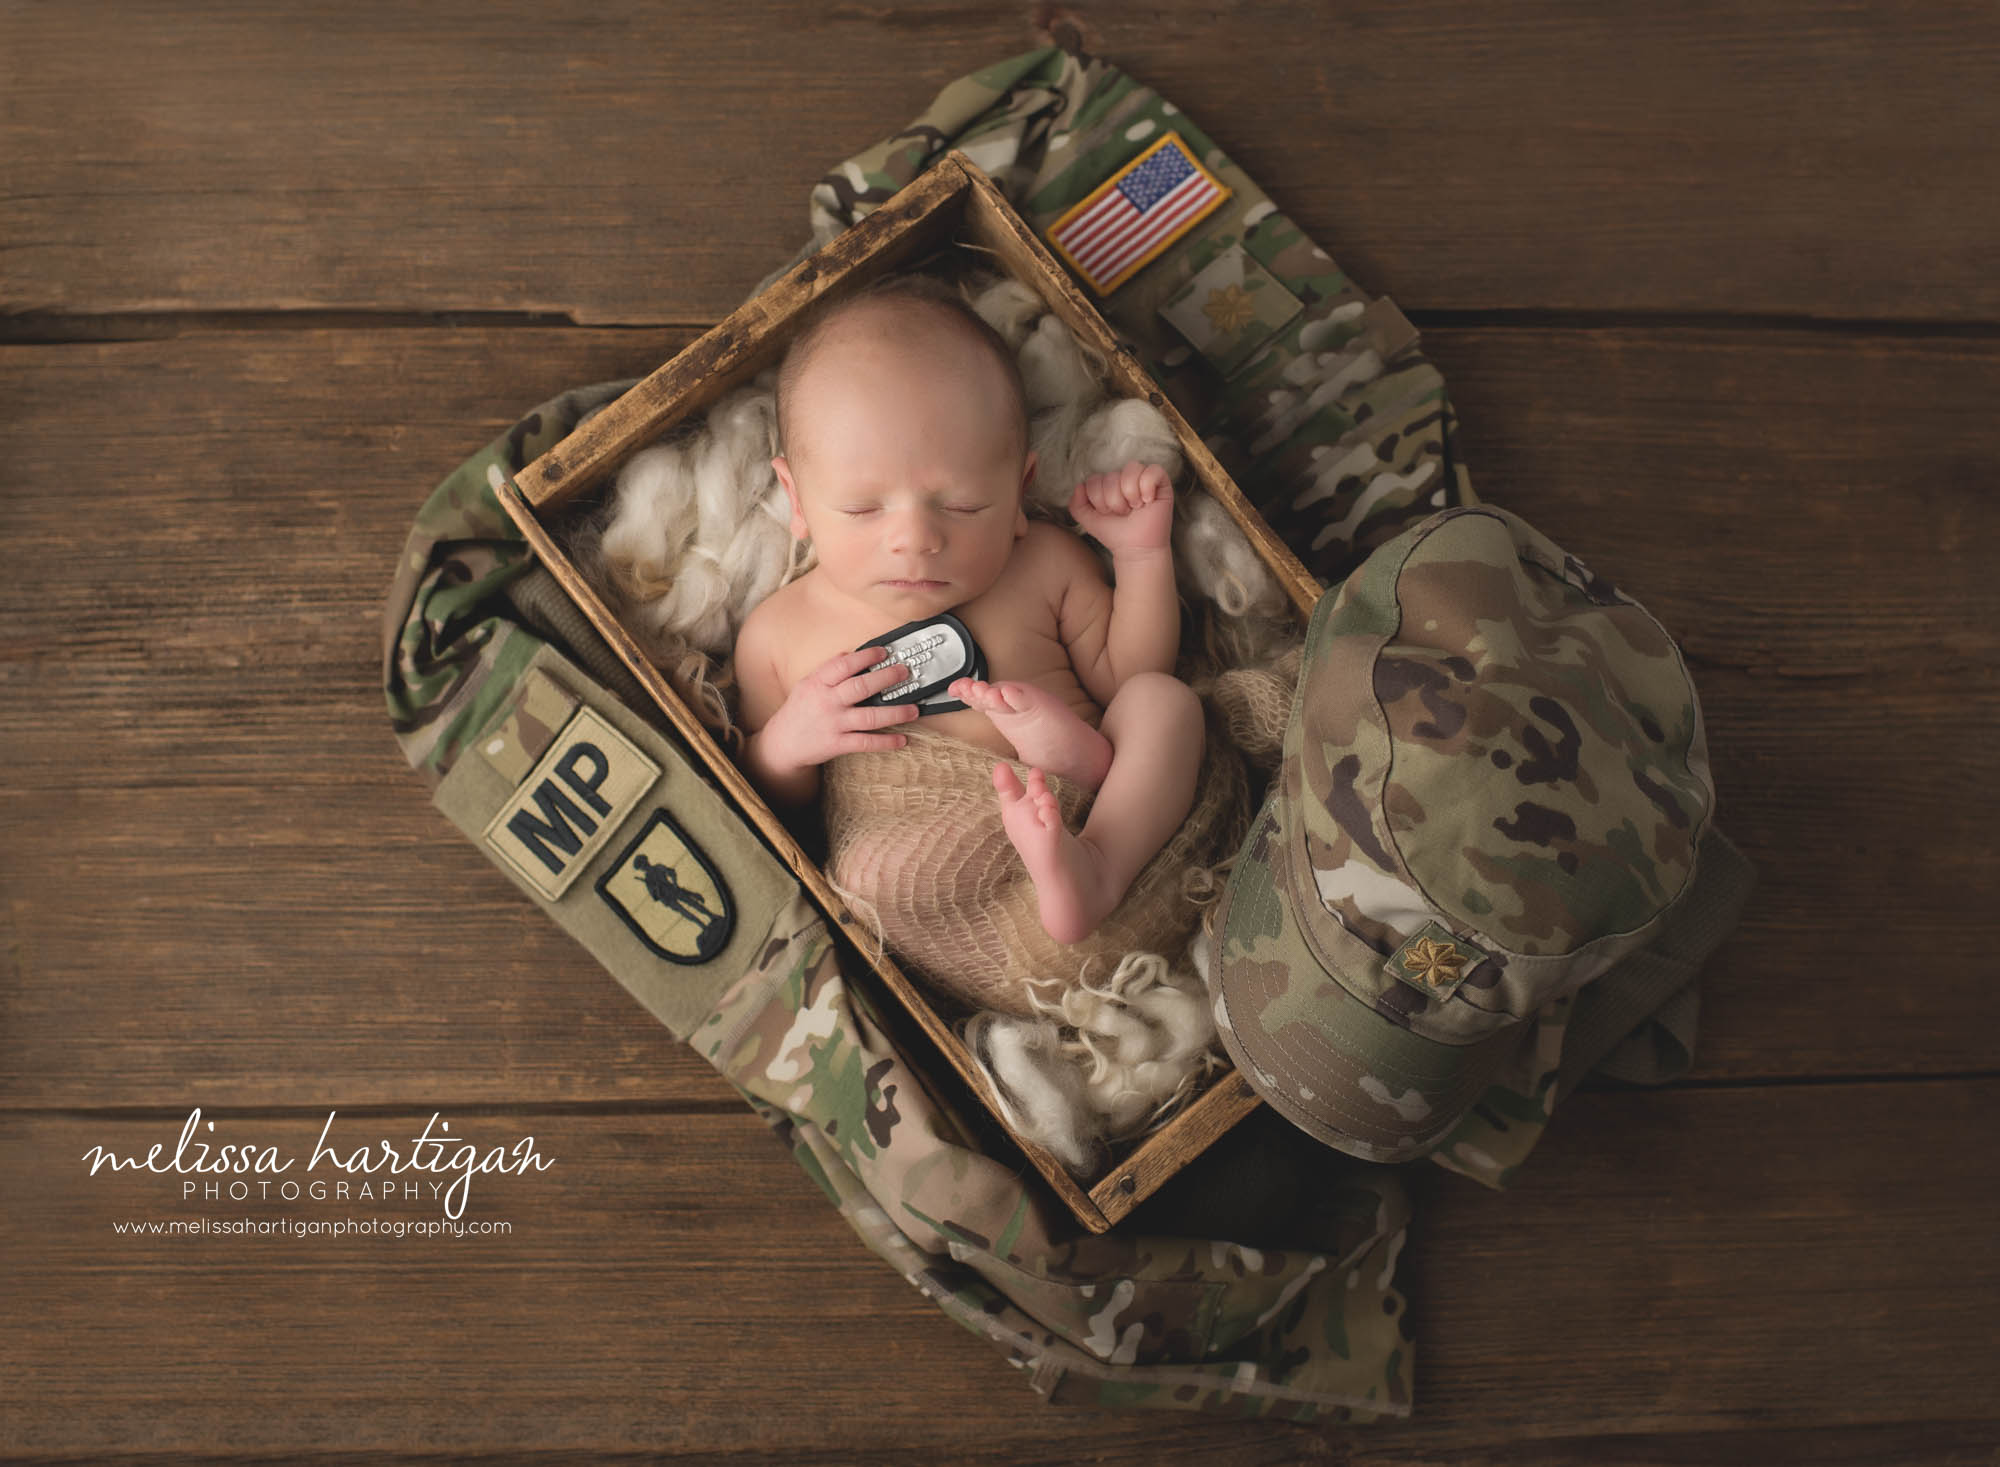 newborn baby boy posed with army reserve uniform and dogtags